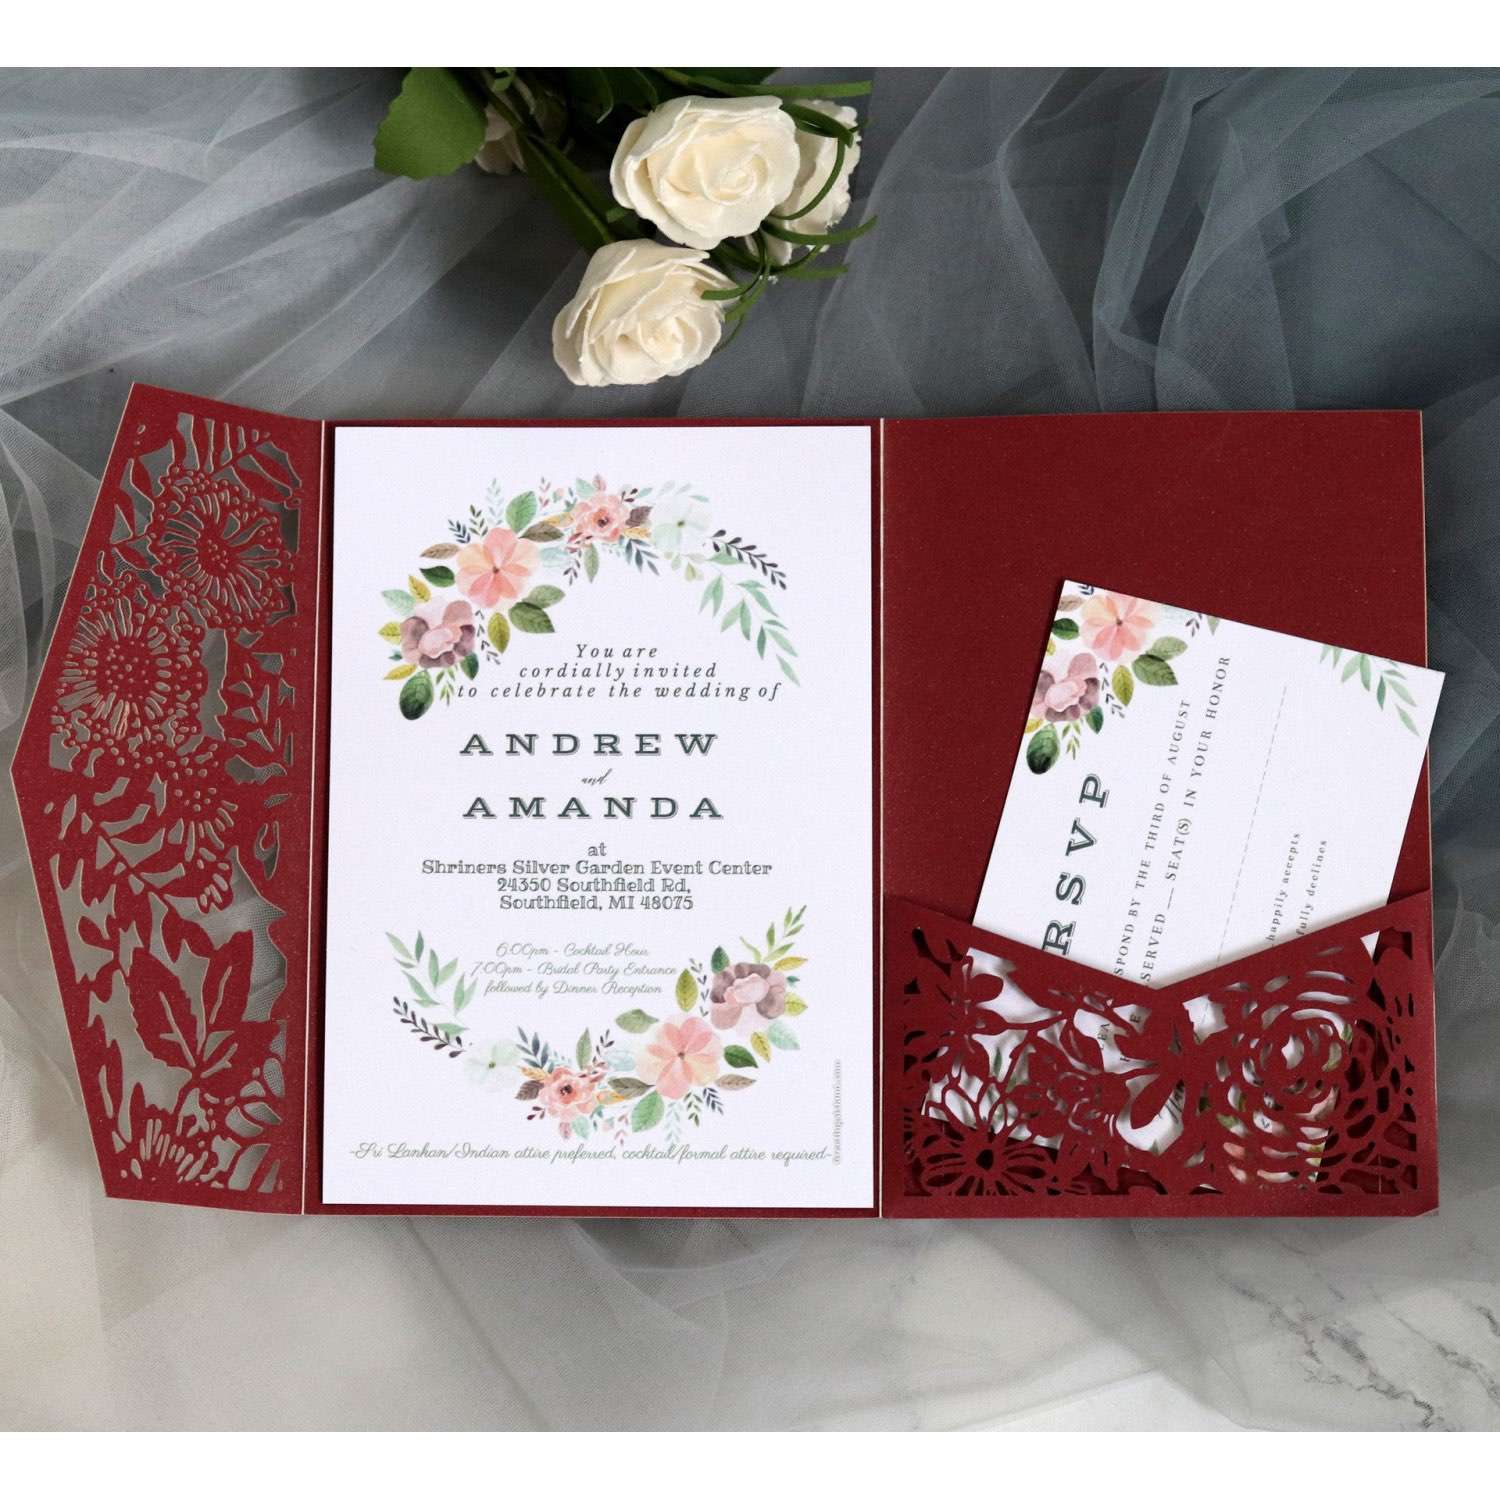 Business Annual Meeting Invitation Card Laser Cut Paper 